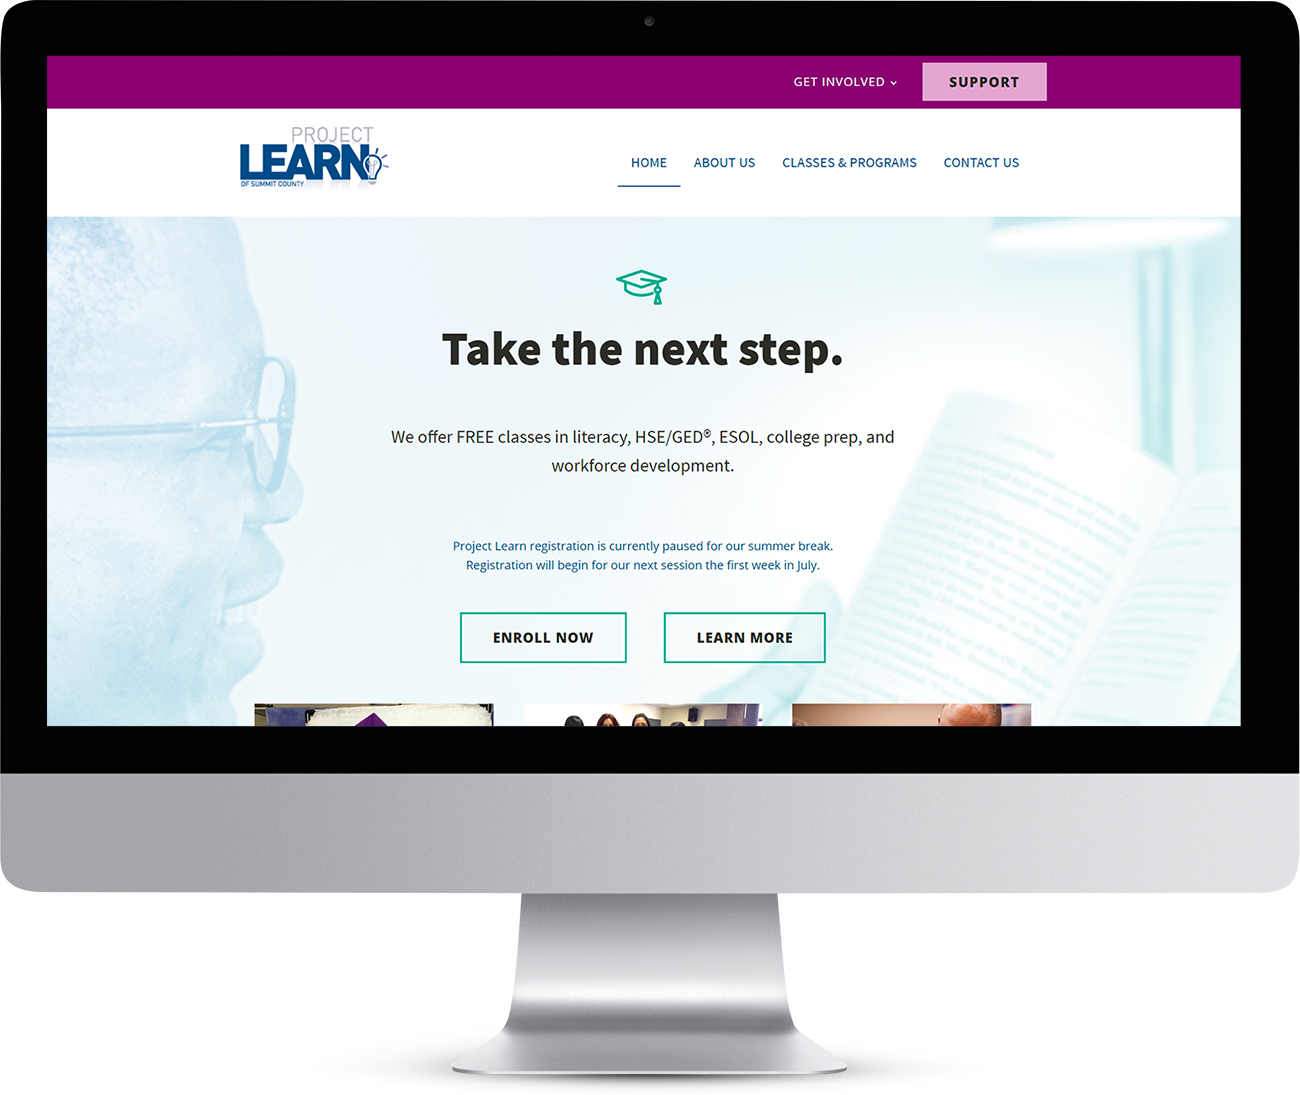 Project Learn website homepage showing on a monitor screen